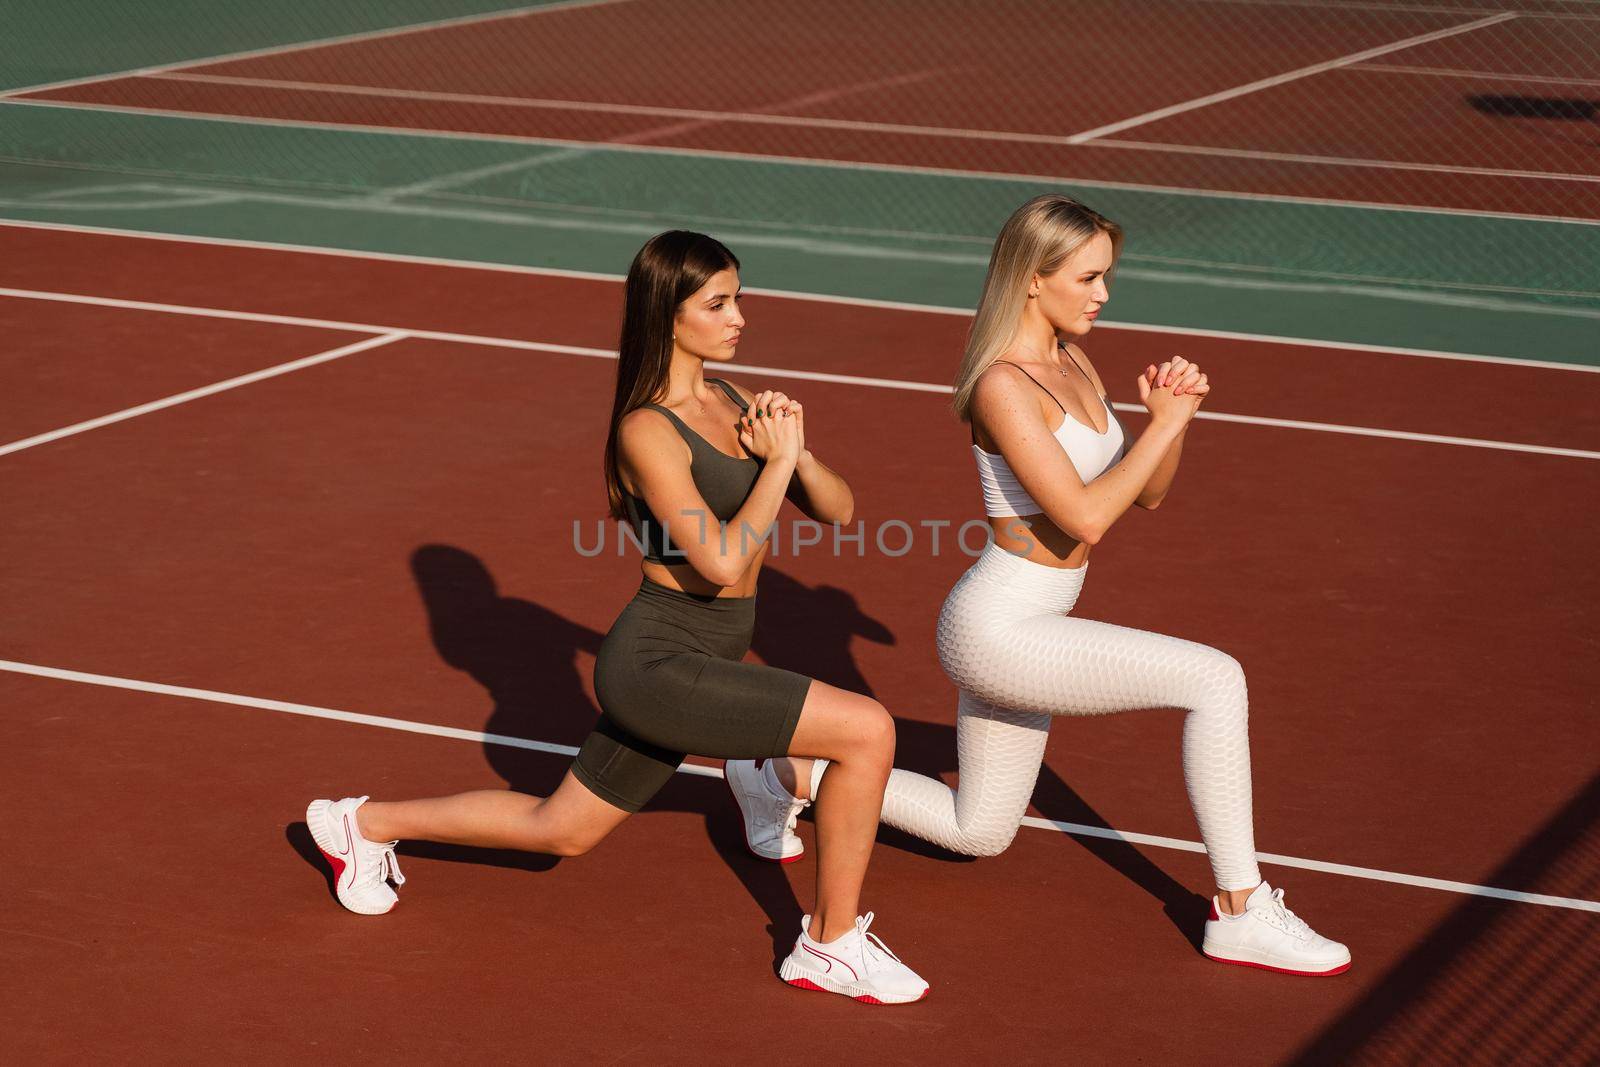 2 girls doing lunges training for stretching legs. Sport exercises on the tennis court